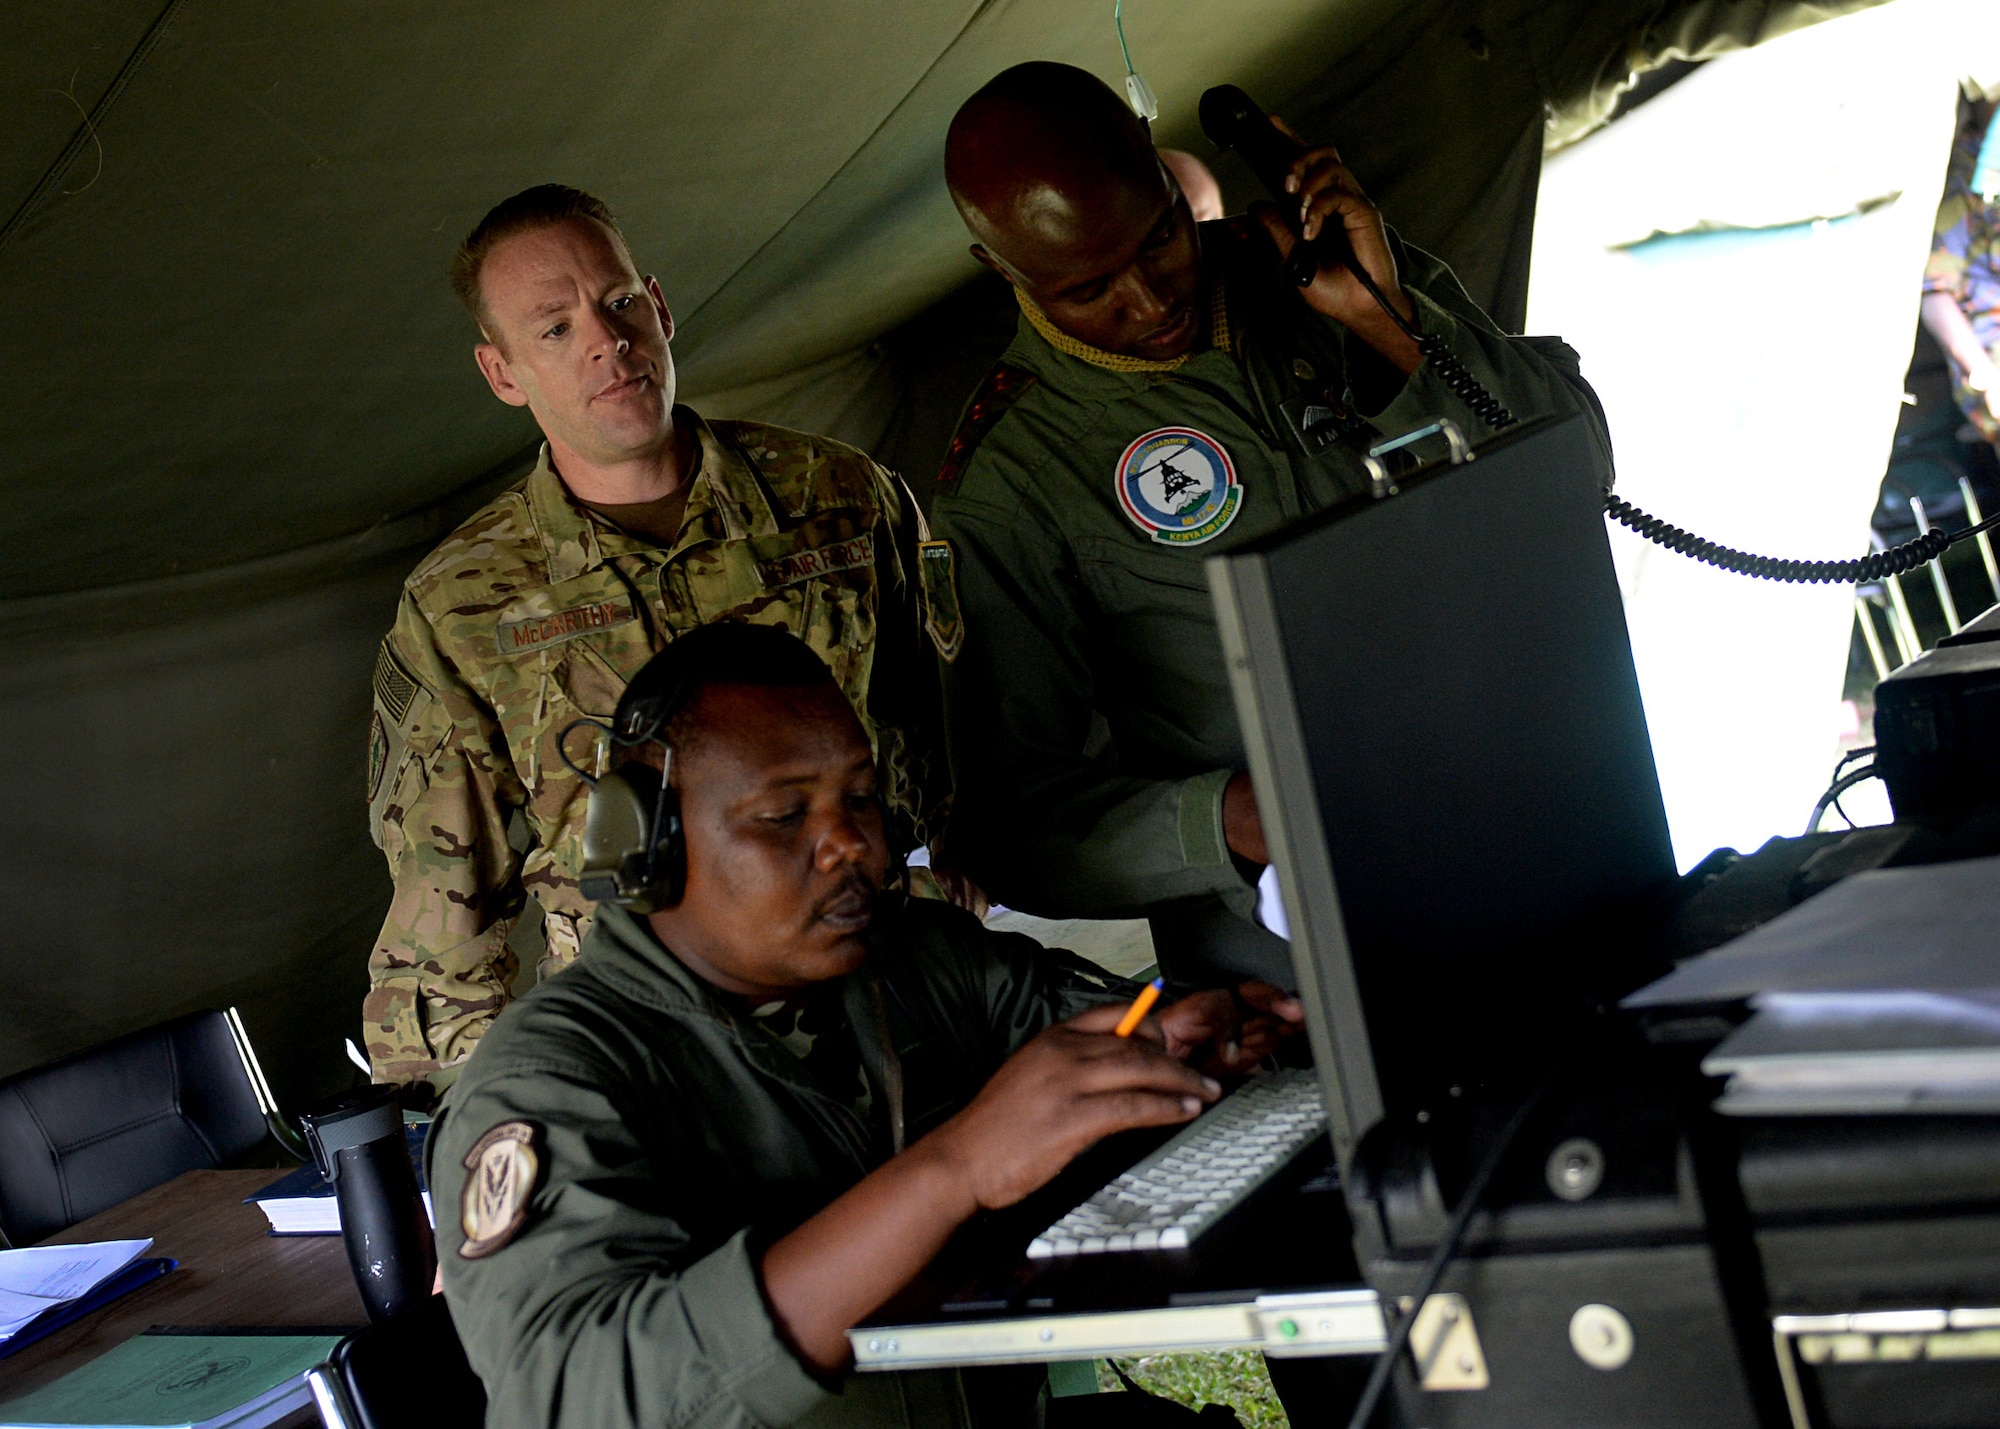 U.S. Air Force Maj. Christopher McCarthy, HH-60G helicopter evaluator pilot, 56th Rescue Squadron, observes Kenyan Defense Force members during African Partnership Flight Kenya June 27, 2016 at Laikipia Air Base, Kenya. The APF is designed for U.S. and African partner nations to work together in a learning environment to help build expertise and professional knowledge and skills. The APF included a Kenyan-led exercise, Linda Rhino, in which instructors observed the application of what was learned in the classroom and provided feedback. The exercise included multiple personnel recovery scenarios. (U.S. Air Force photo by Tech. Sgt. Evelyn Chavez/Released)